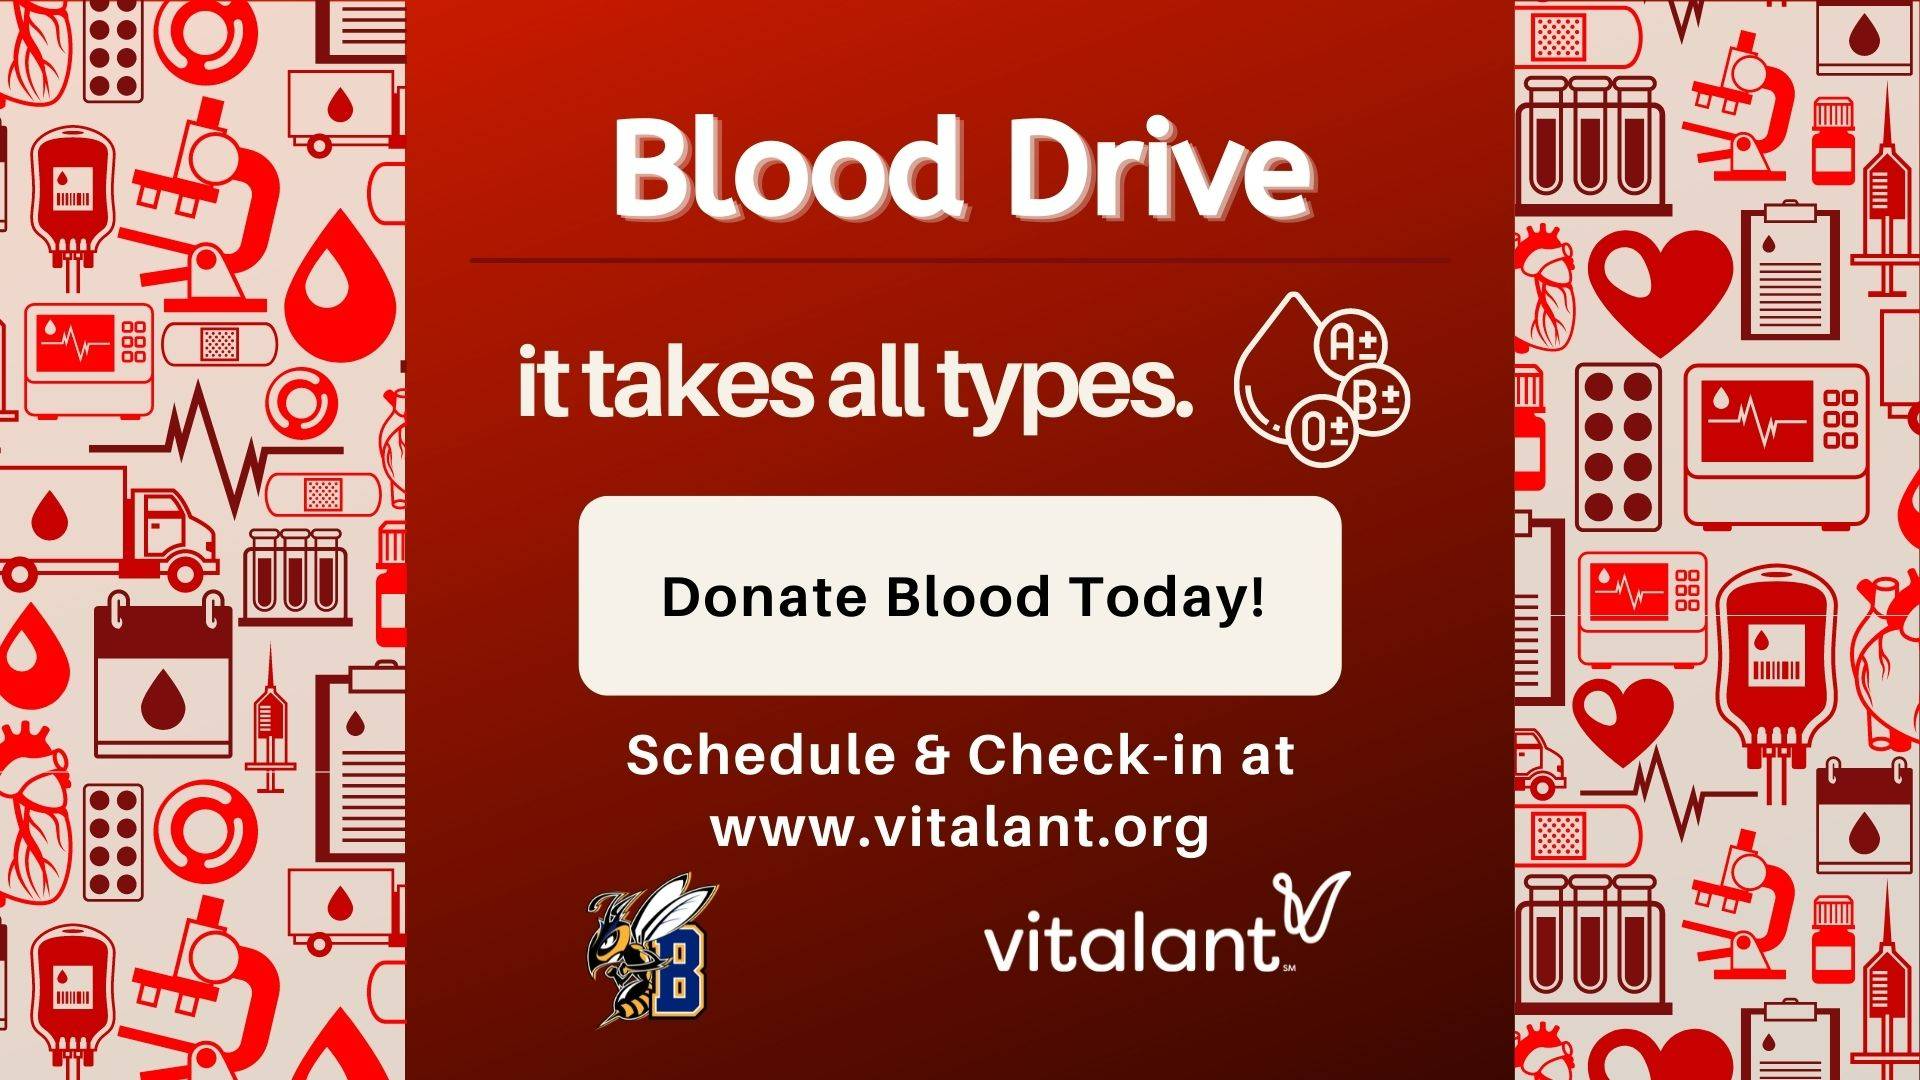 MSUB Blood Drive. it takes all types. Donate Blood Today. Schedule & Check-in at www.vitalant.org